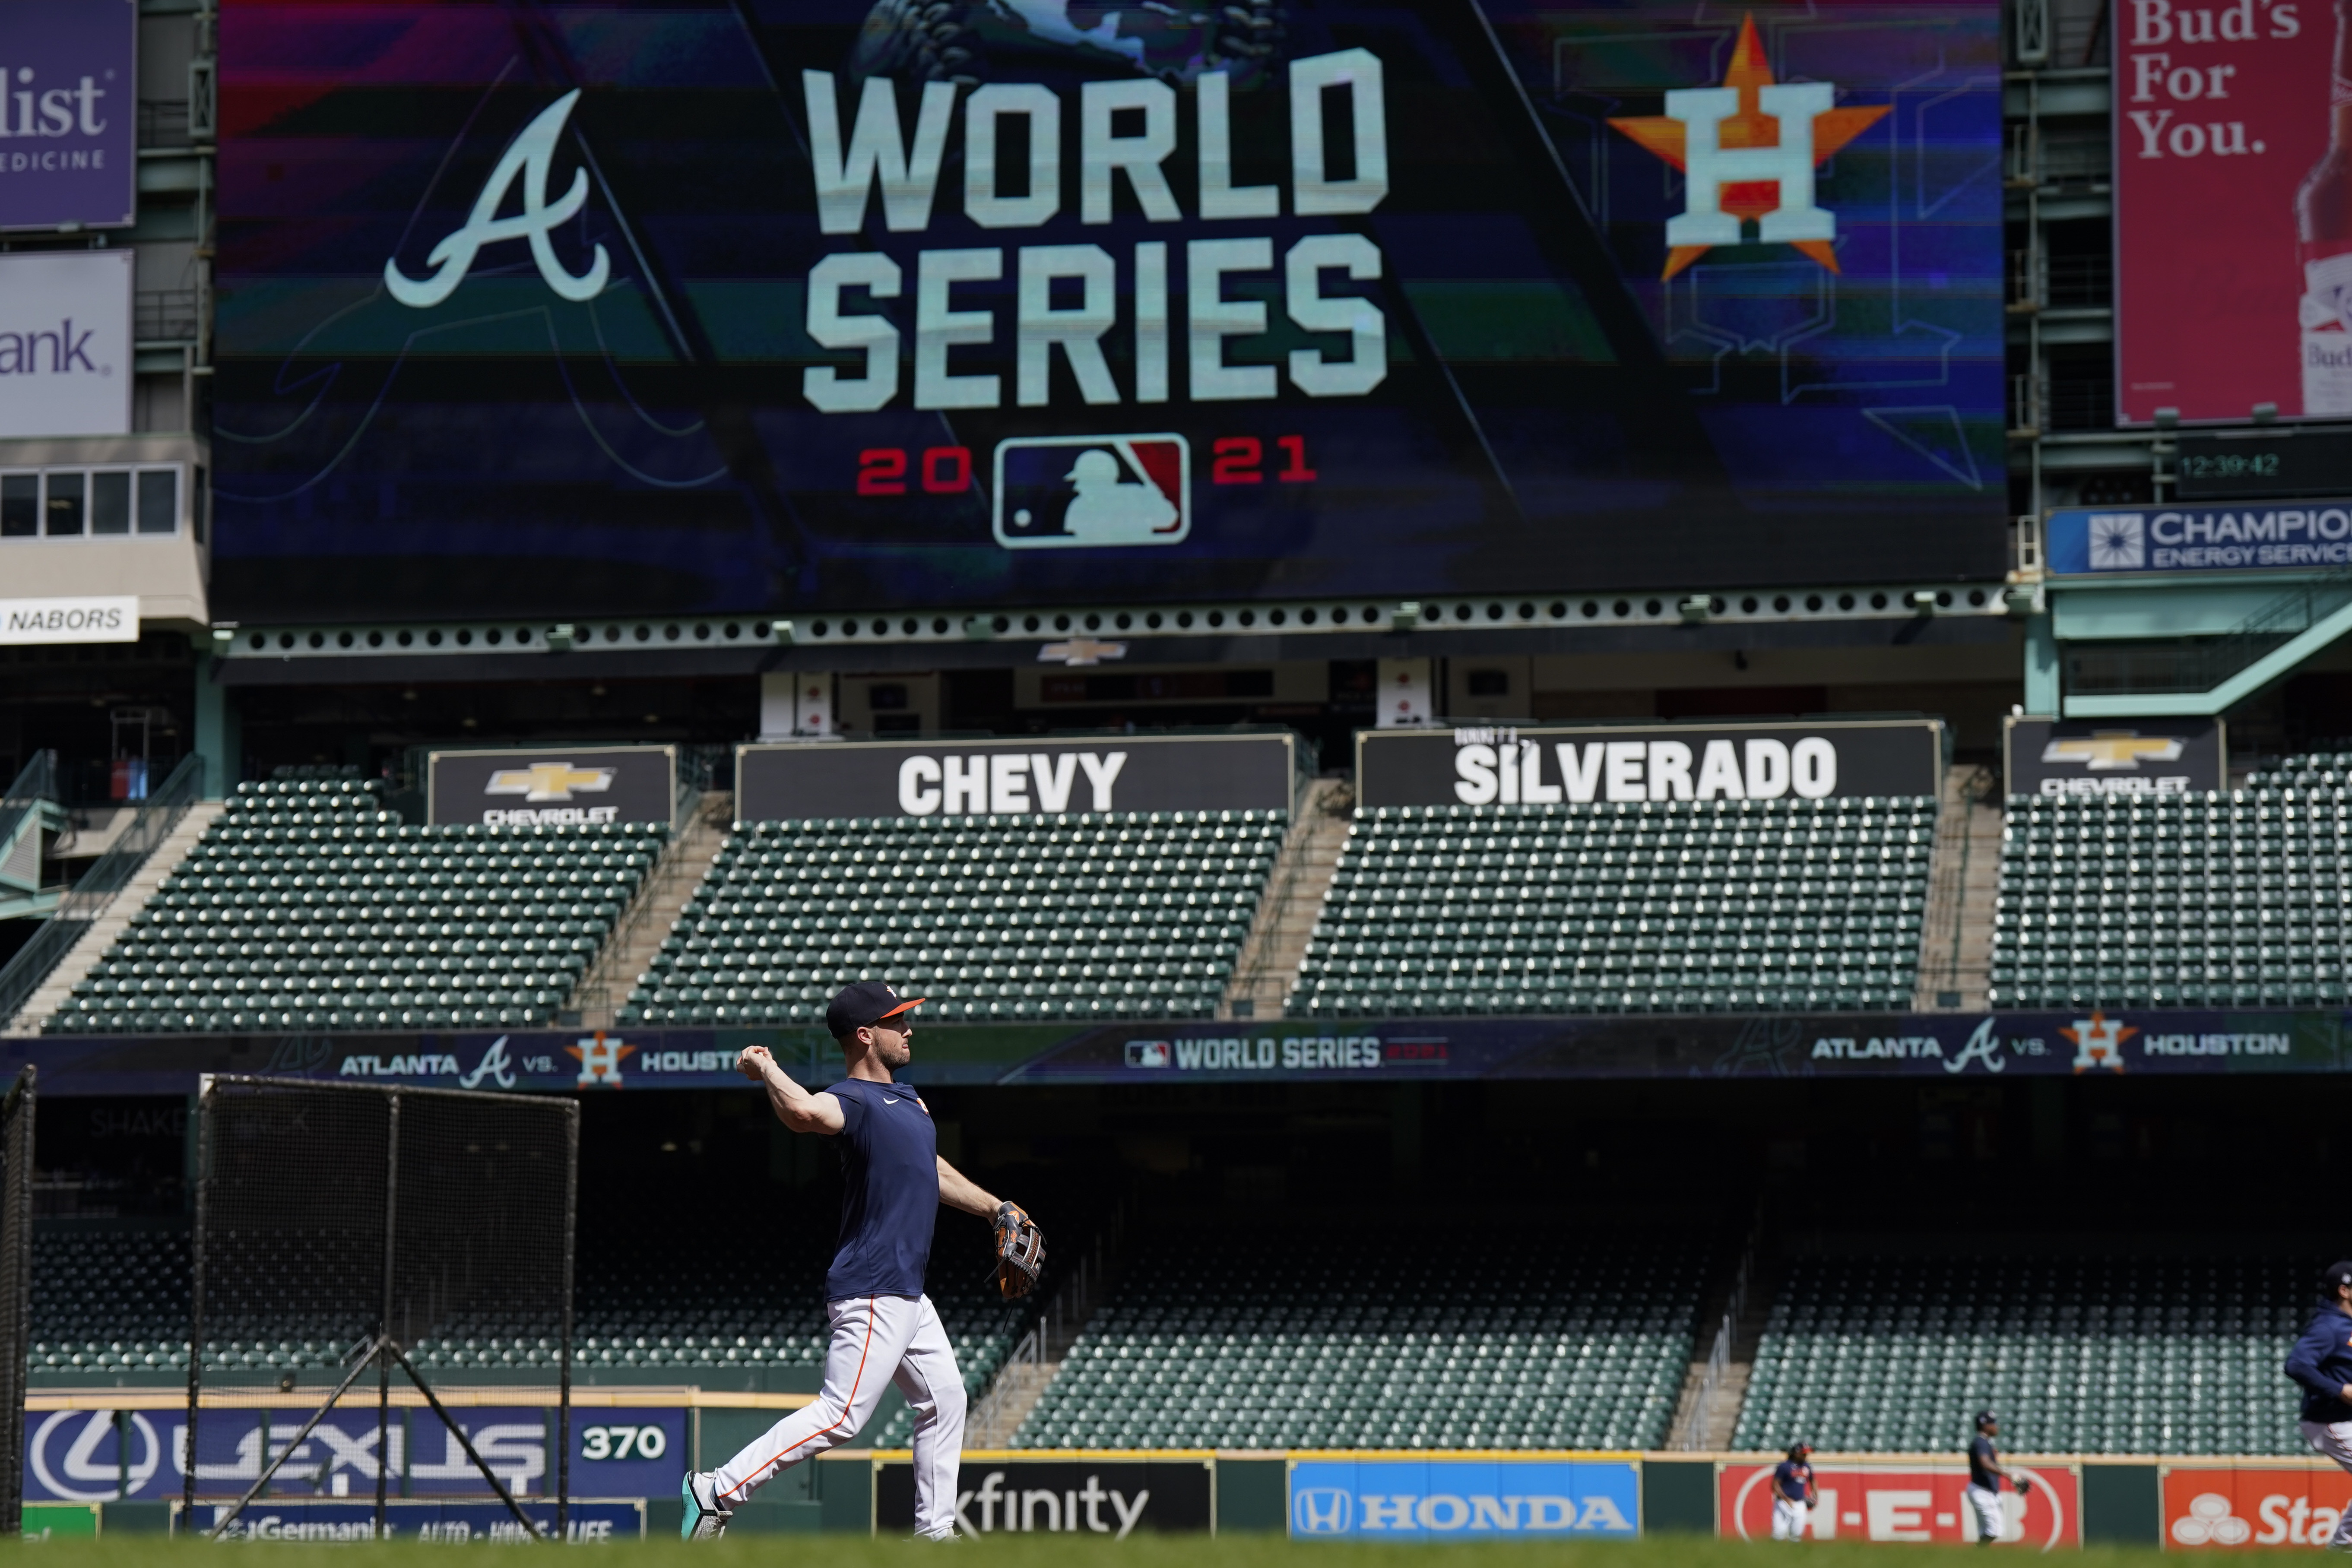 How to watch 2021 World Series Dates, times, TV schedule, free live streams for Atlanta Braves vs